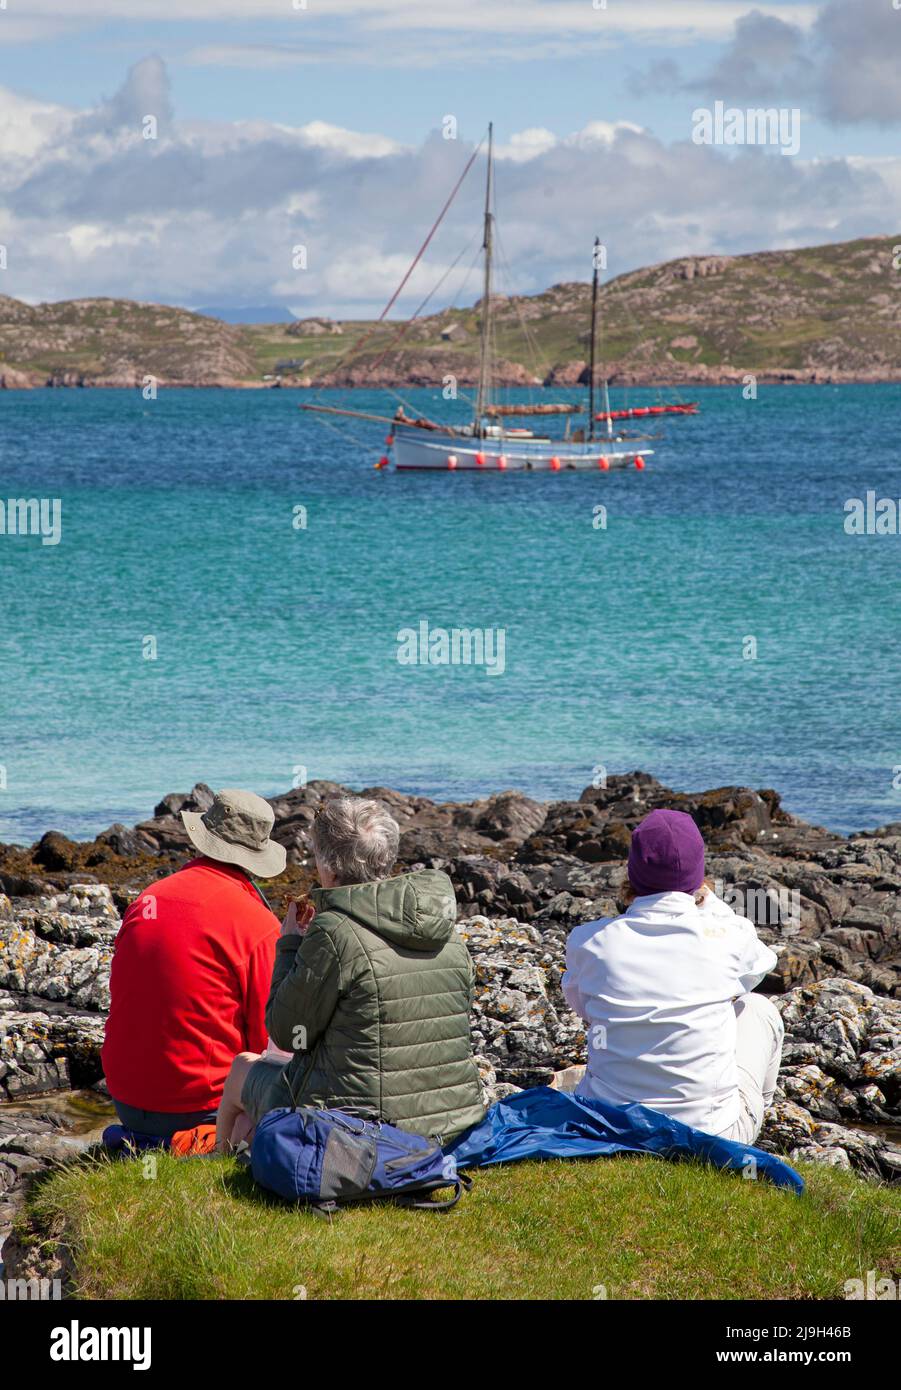 Isle of Iona, Inner Hebrides, Scotland, UK. 23rd May 2022. Sunny afternoon after morning drizzle, temperature rising to 18 degrees mid-afternoon, slight beeze keeping midges at bay. Pictured: Family havng a pleasant picnic with a beautiful view over Sound of Iona. Credit: Arch White/Alamy Live News. Stock Photo